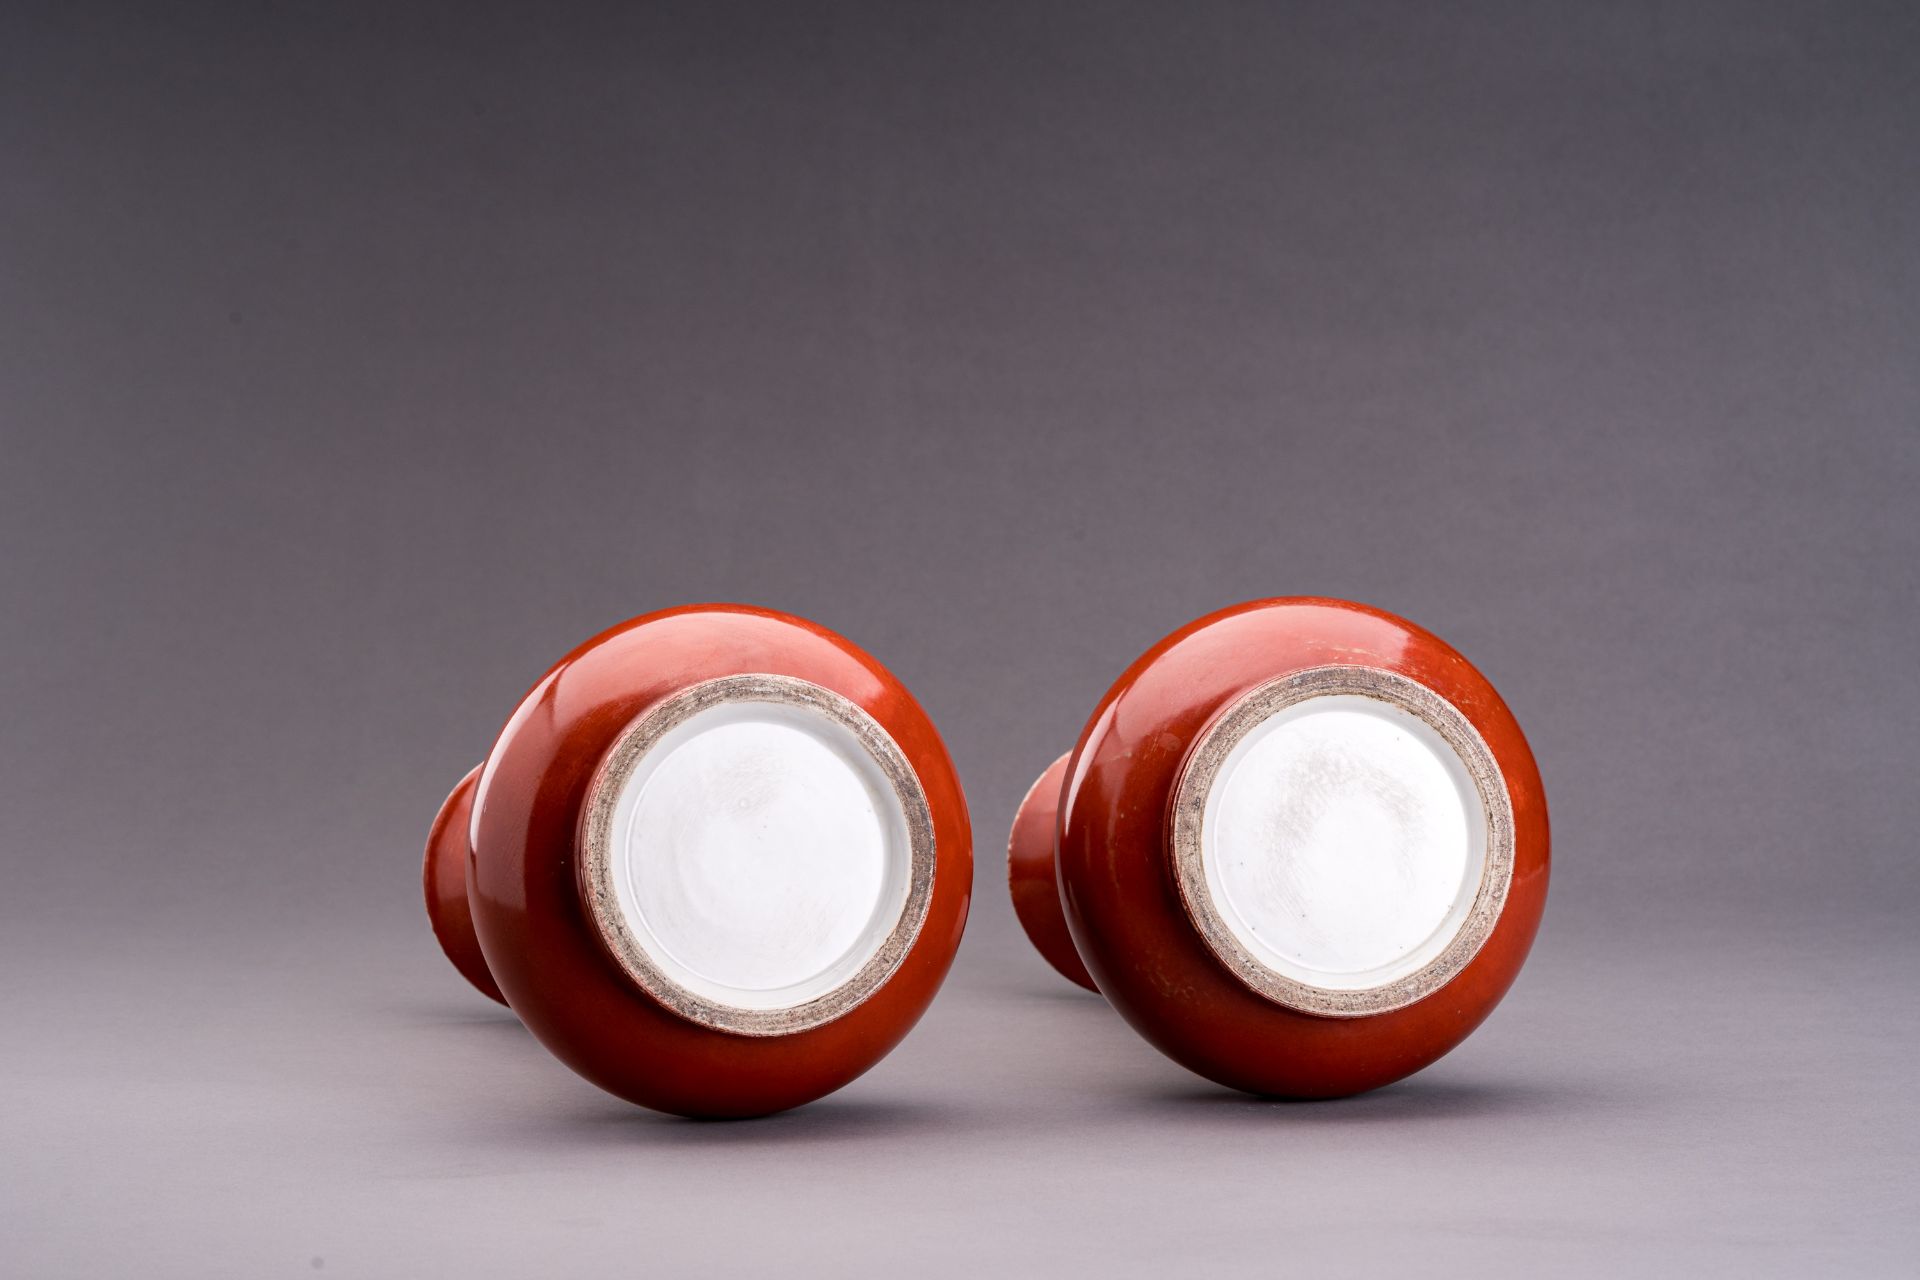 A PAIR OF A COPPER-RED PORCELAIN BOTTLE VASES - Image 6 of 6